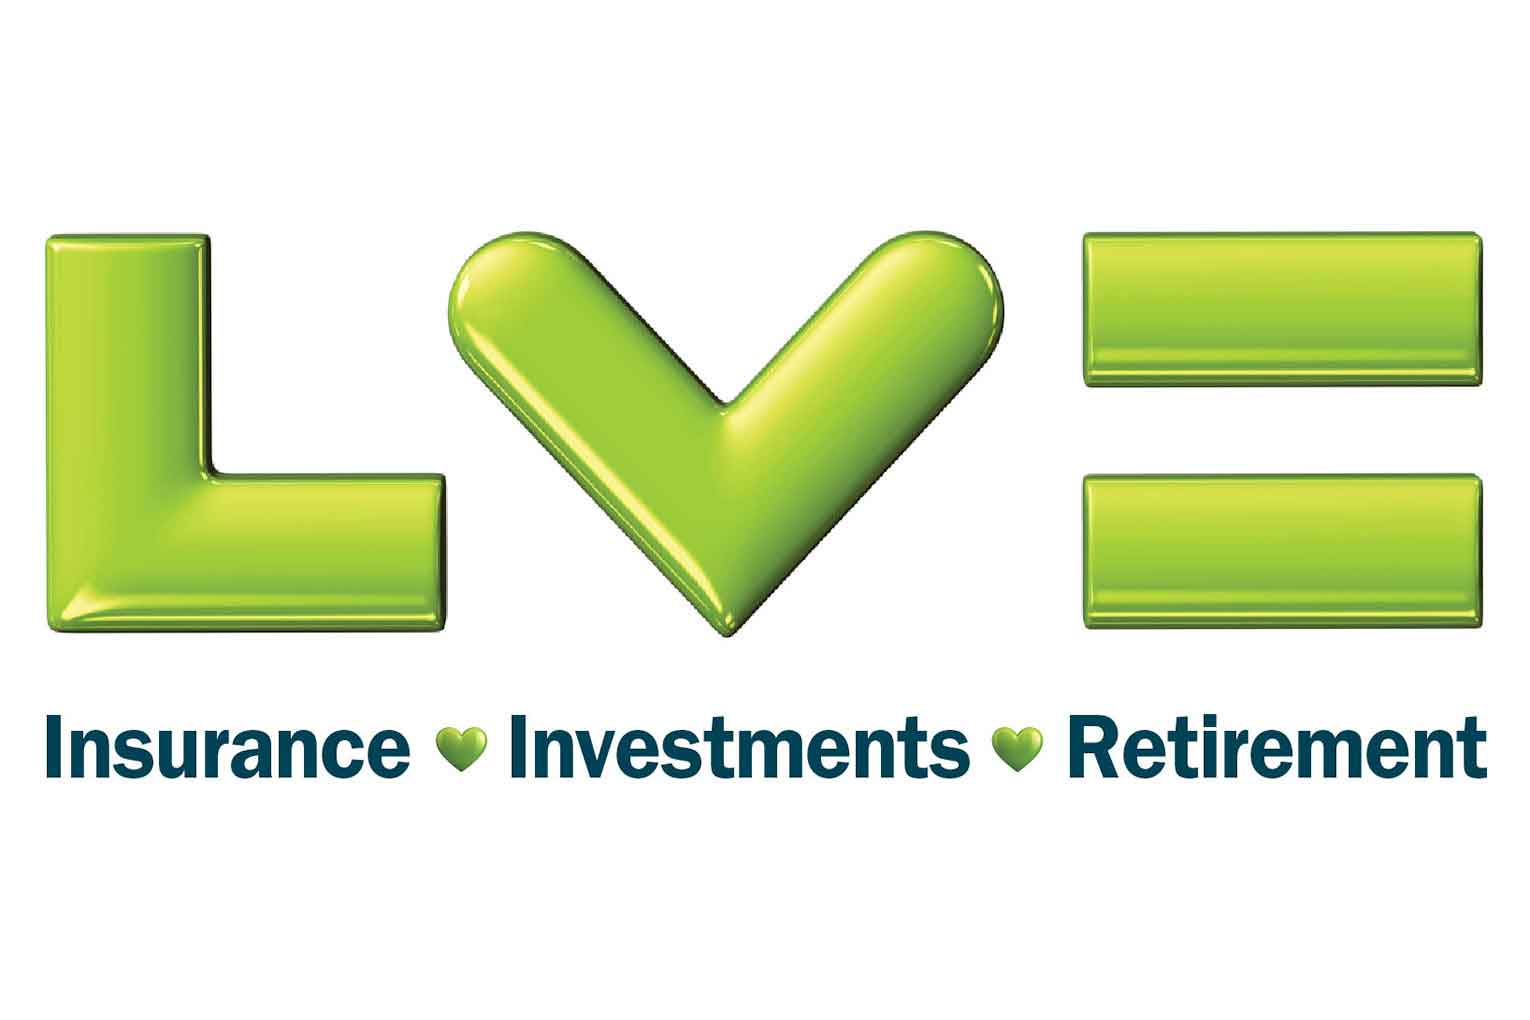 LV= Insurance, Life, Investments, Pensions & Retirement